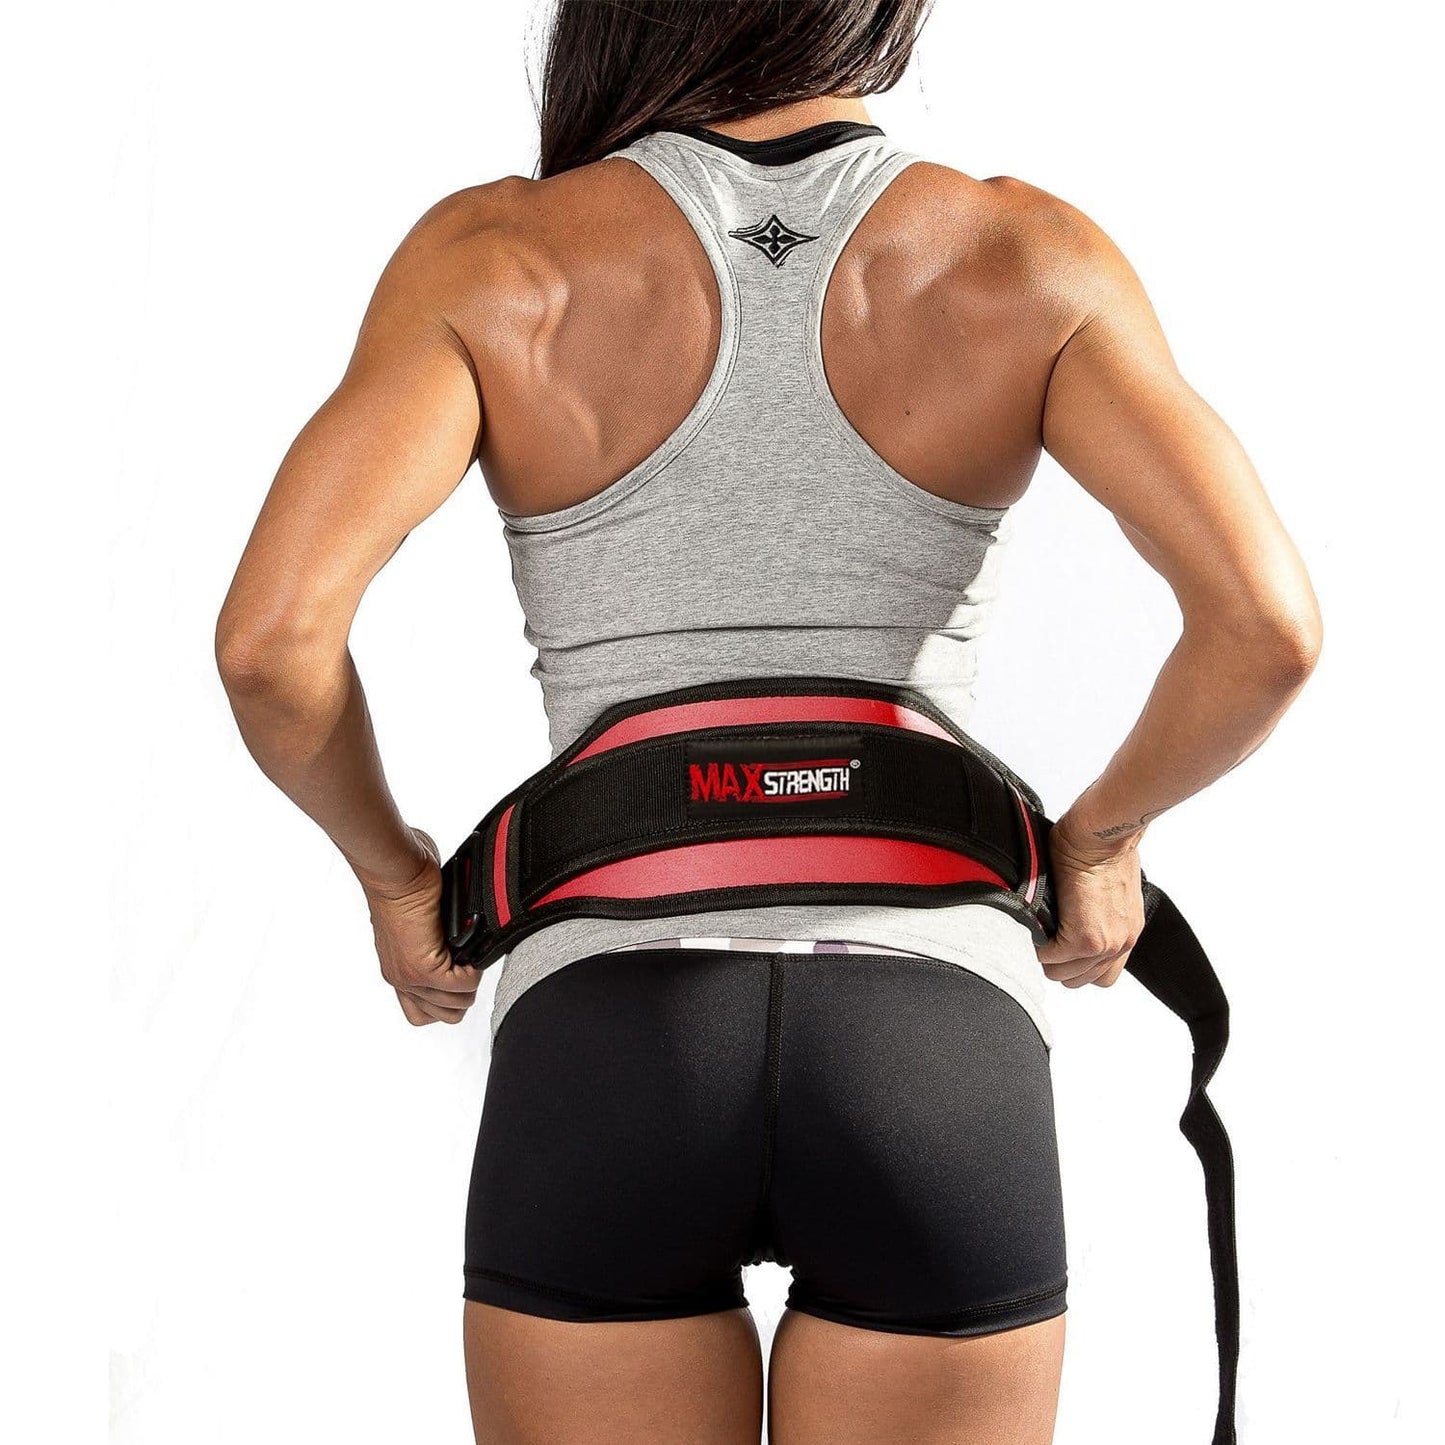 X MAXSTRENGTH Neoprene Weightlifting Back Support Belt Red